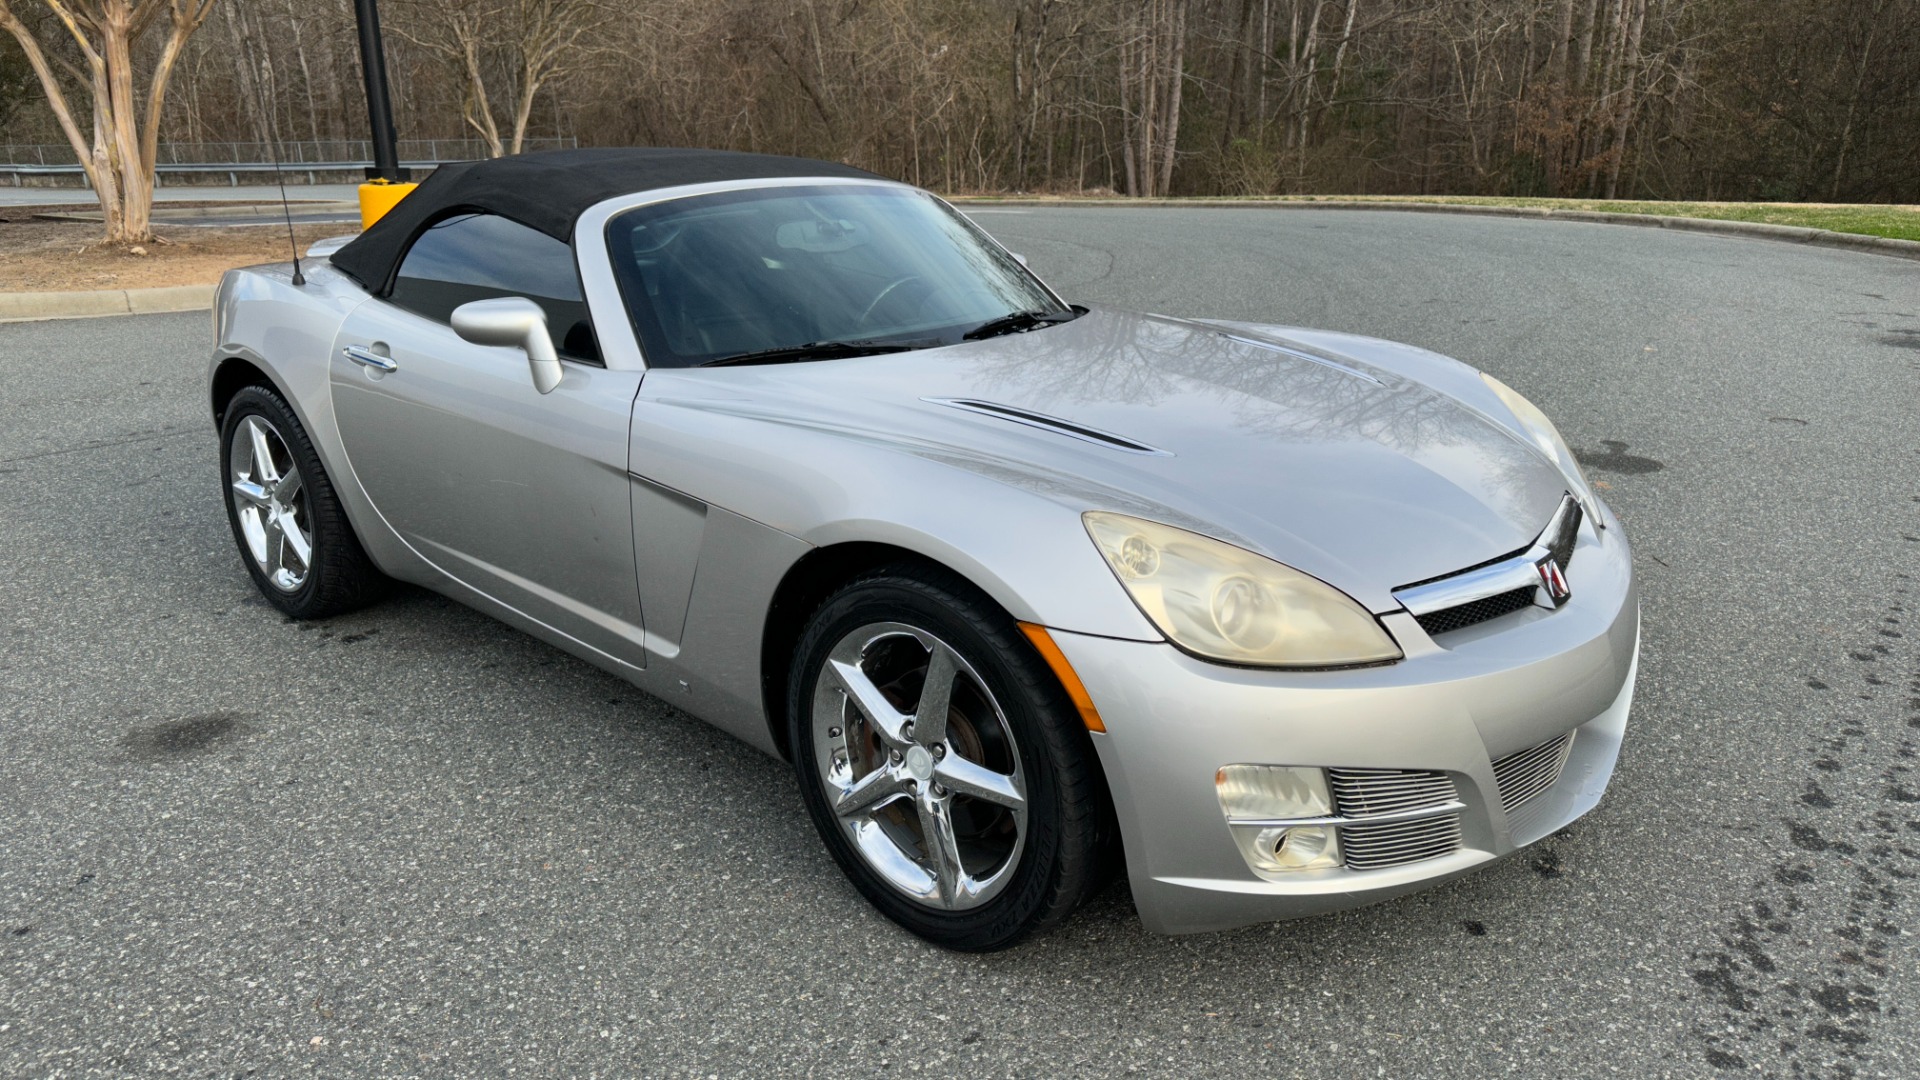 Used 2008 Saturn Sky CONVERTIBLE / MONSOON AUDIO / AUTOMATIC / PREMIUM TRIM / SPOILER for sale $10,995 at Formula Imports in Charlotte NC 28227 11